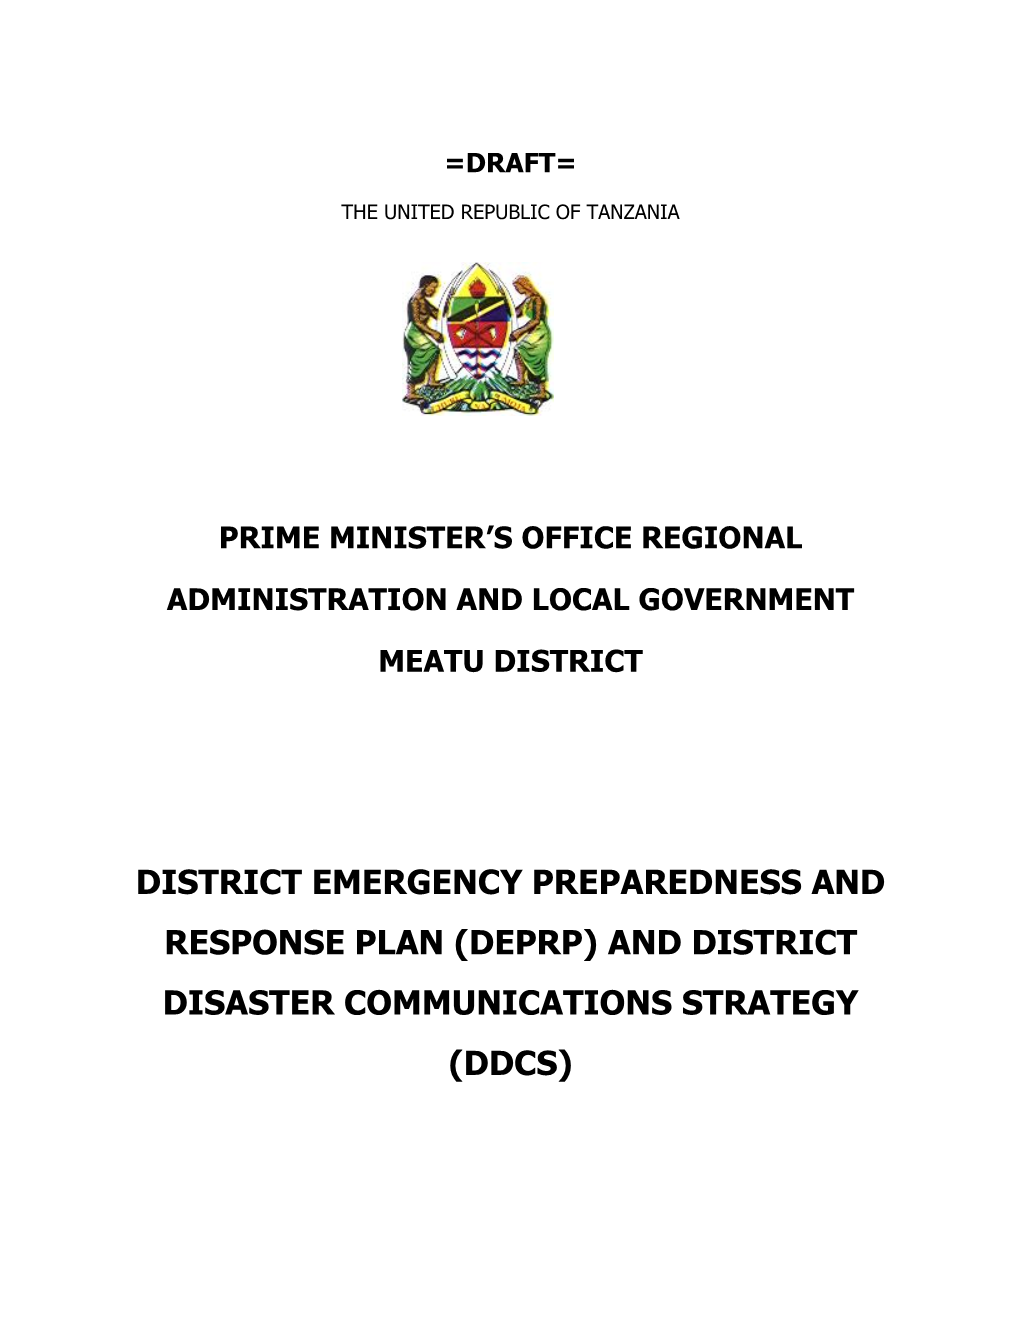 Deprp) and District Disaster Communications Strategy (Ddcs